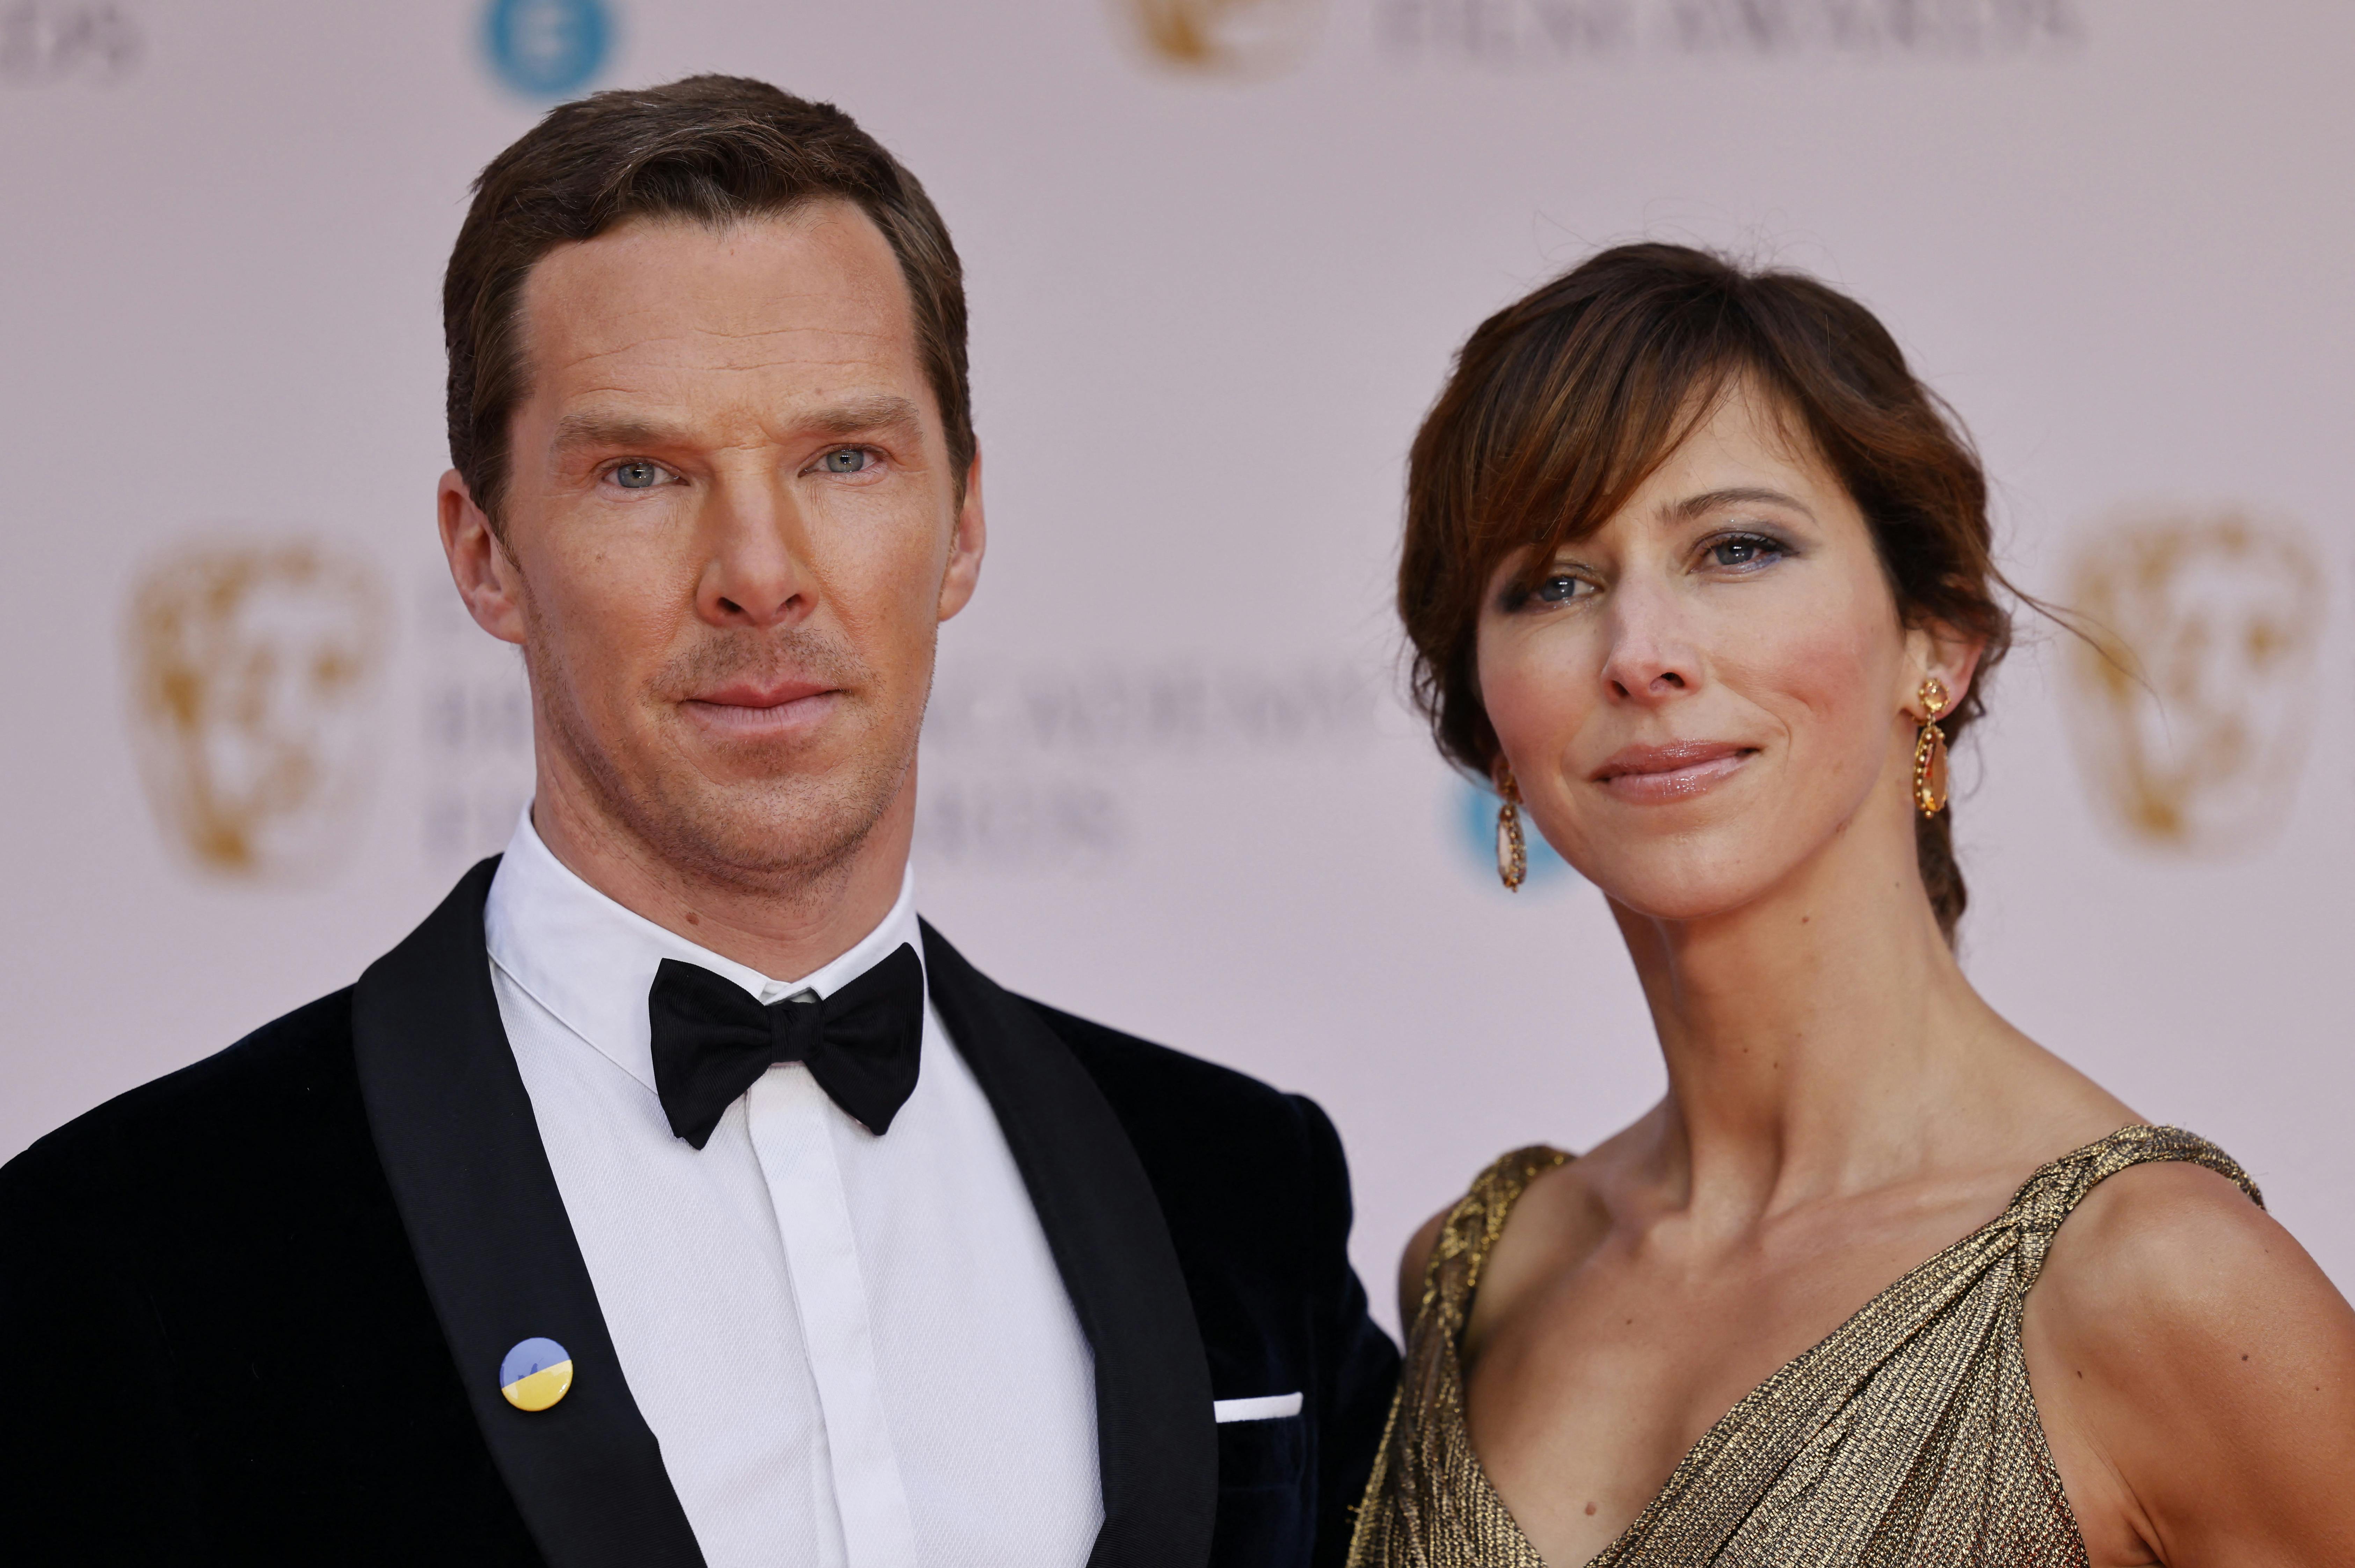 British actor Benedict Cumberbatch and his wife Sophie Hunter pose on the red carpet upon arrival at the BAFTA British Academy Film Awards at the Royal Albert Hall, in London, on March 13, 2022. Tolga Akmen / AFP